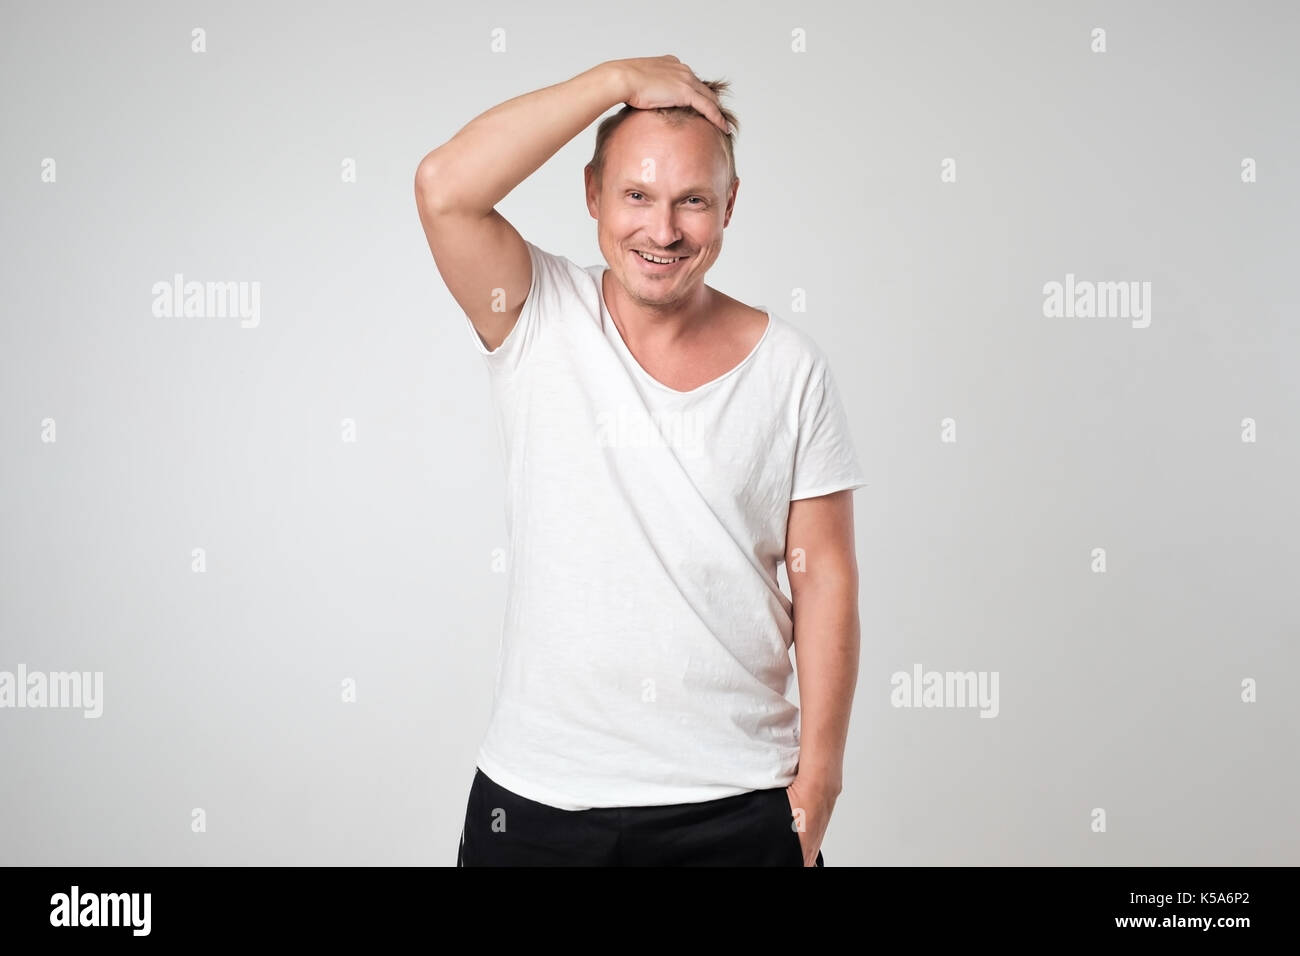 Smiling young man in white t-shirt standing against white background Concept of self confident man. Stock Photo